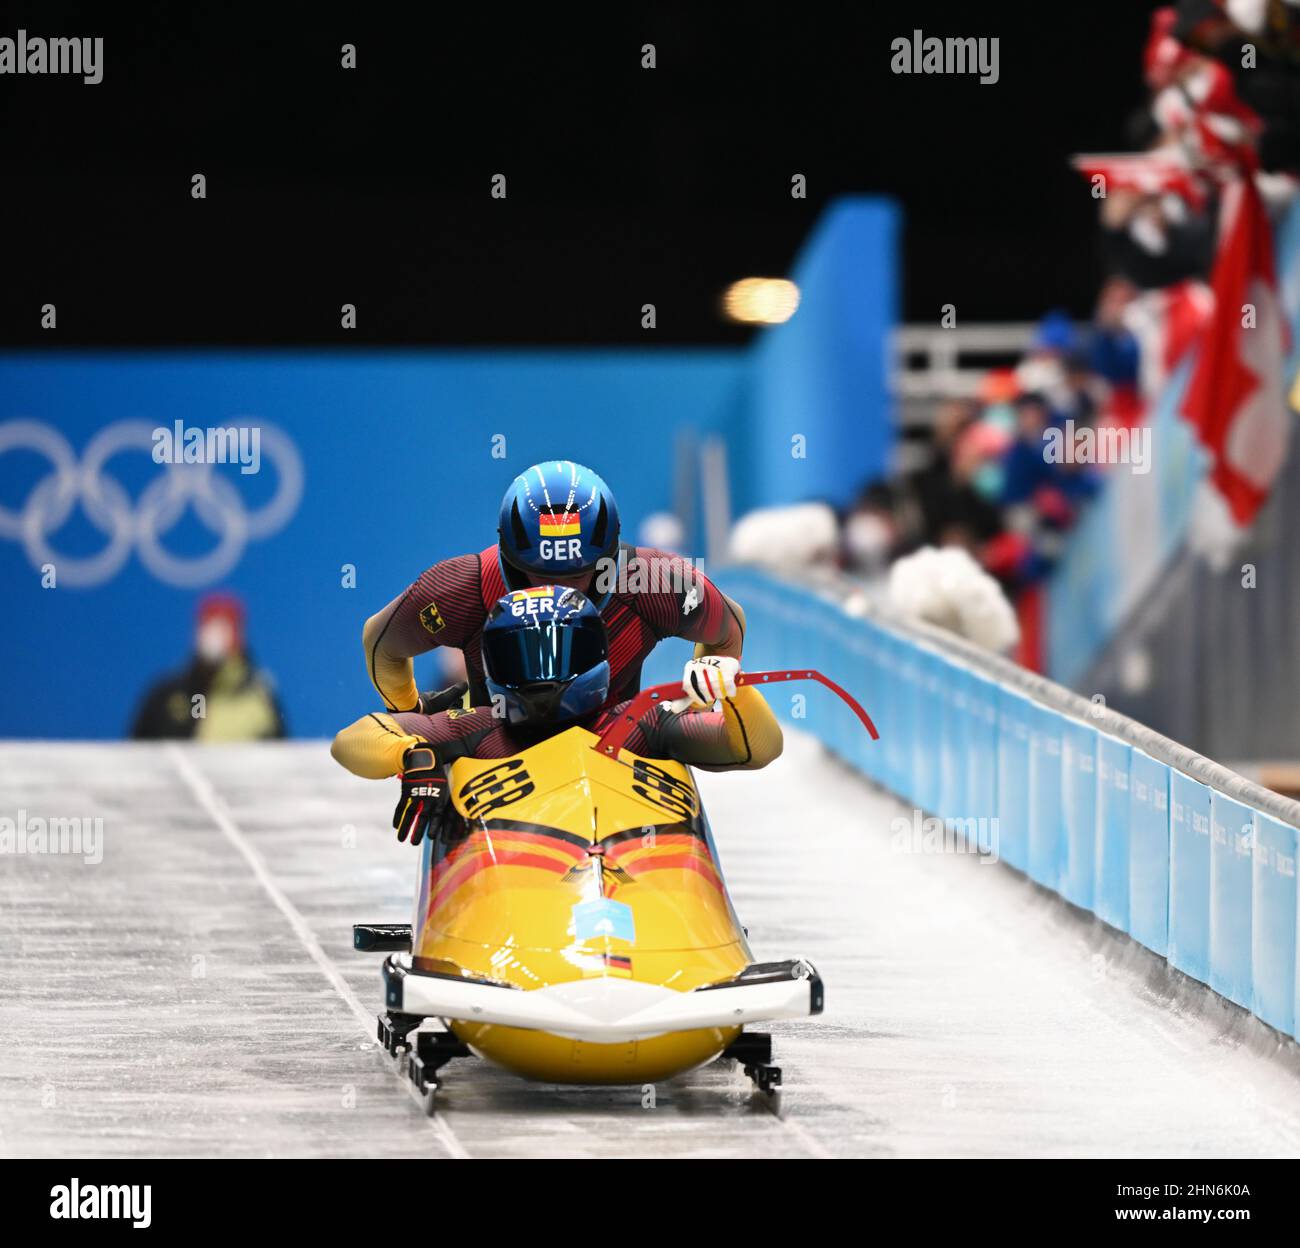 Beijing, China. 14th Feb, 2022. Francesco Friedrich/Thorsten Margis of Germany compete during the bobsleigh 2-man heat of Beijing 2022 Winter Olympics at National Sliding Centre in Yanqing District, Beijing, capital of China, Feb. 14, 2022. Credit: Sun Fei/Xinhua/Alamy Live News Stock Photo